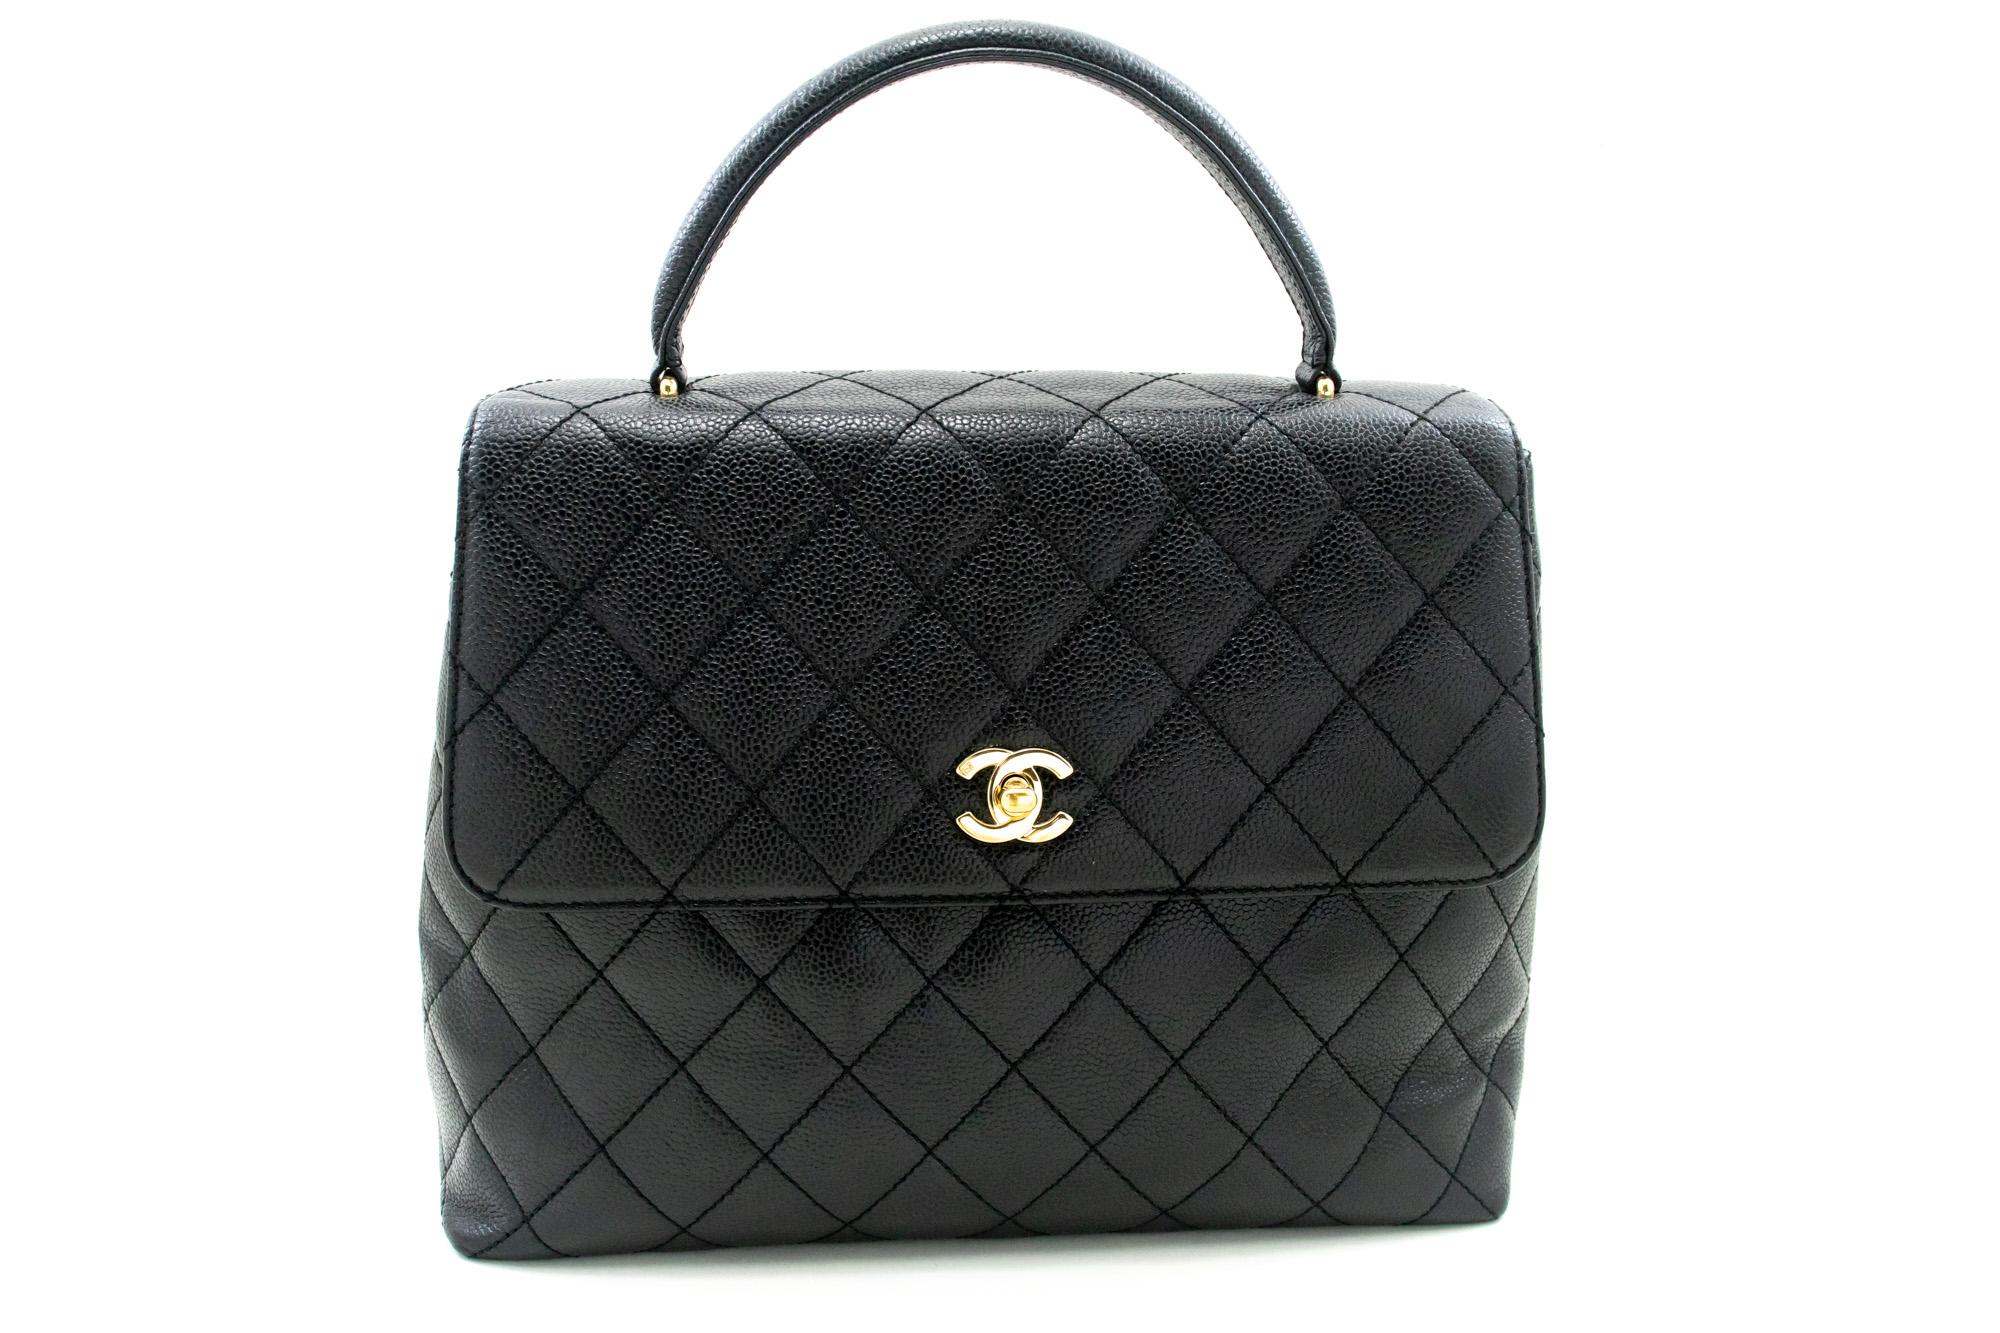 An authentic CHANEL Caviar Handbag Top Handle Bag Kelly Black Flap Leather Gold. The color is Black. The outside material is Leather. The pattern is Solid. This item is Vintage / Classic. The year of manufacture would be 2000-2 0 0 2 .
Conditions &